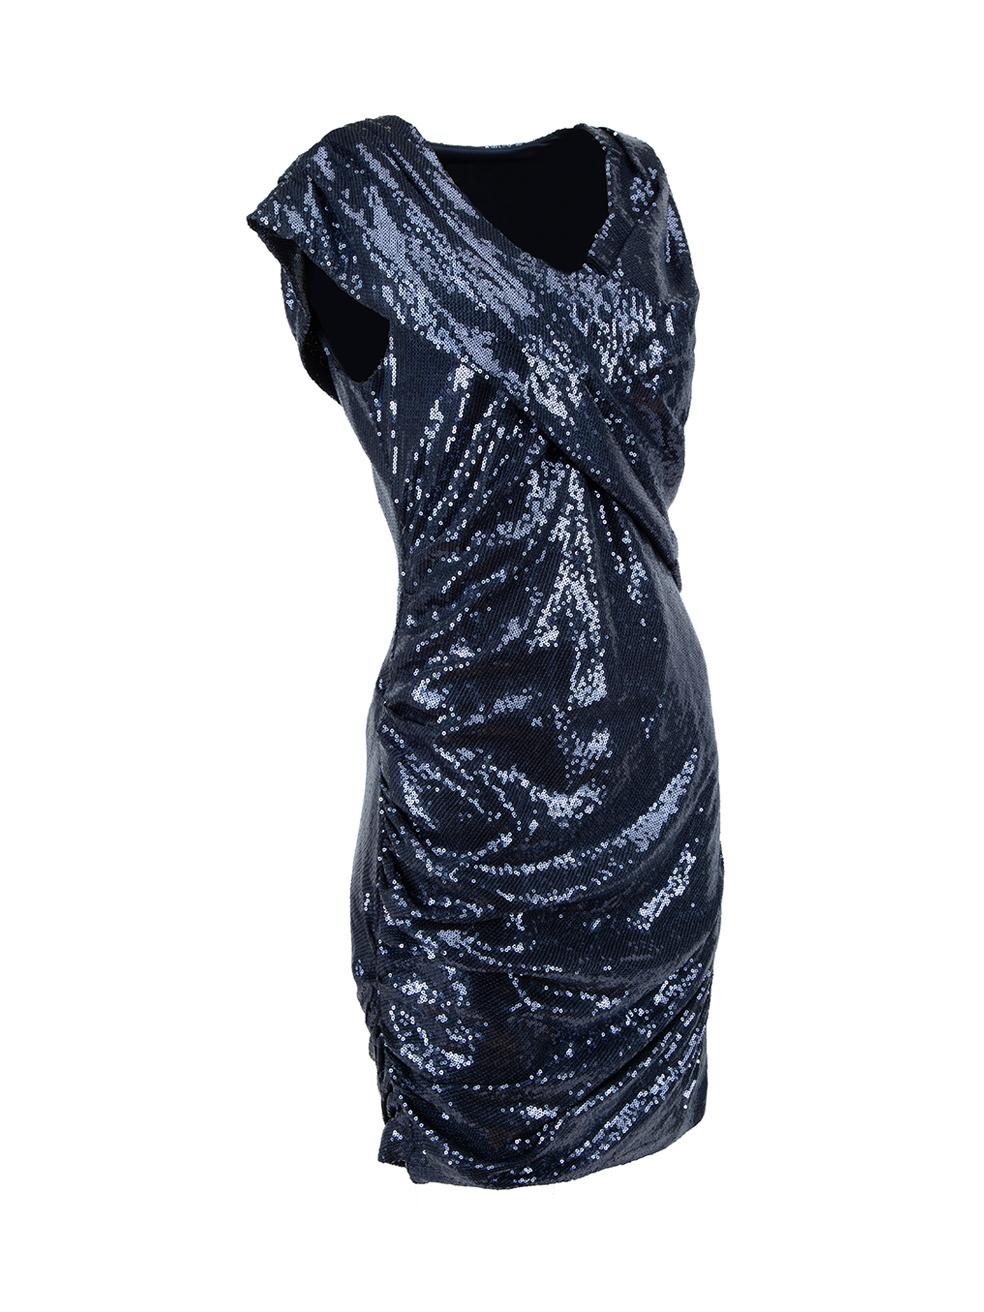 CONDITION is Very good. Minimal wear to dress is evident on this used Alexander Wang designer resale item.



Details


Blue

Synthetic

Mini dress

Ruched accent

Sequinned

Round neckline

Side zip closure with hook and eye





Made in